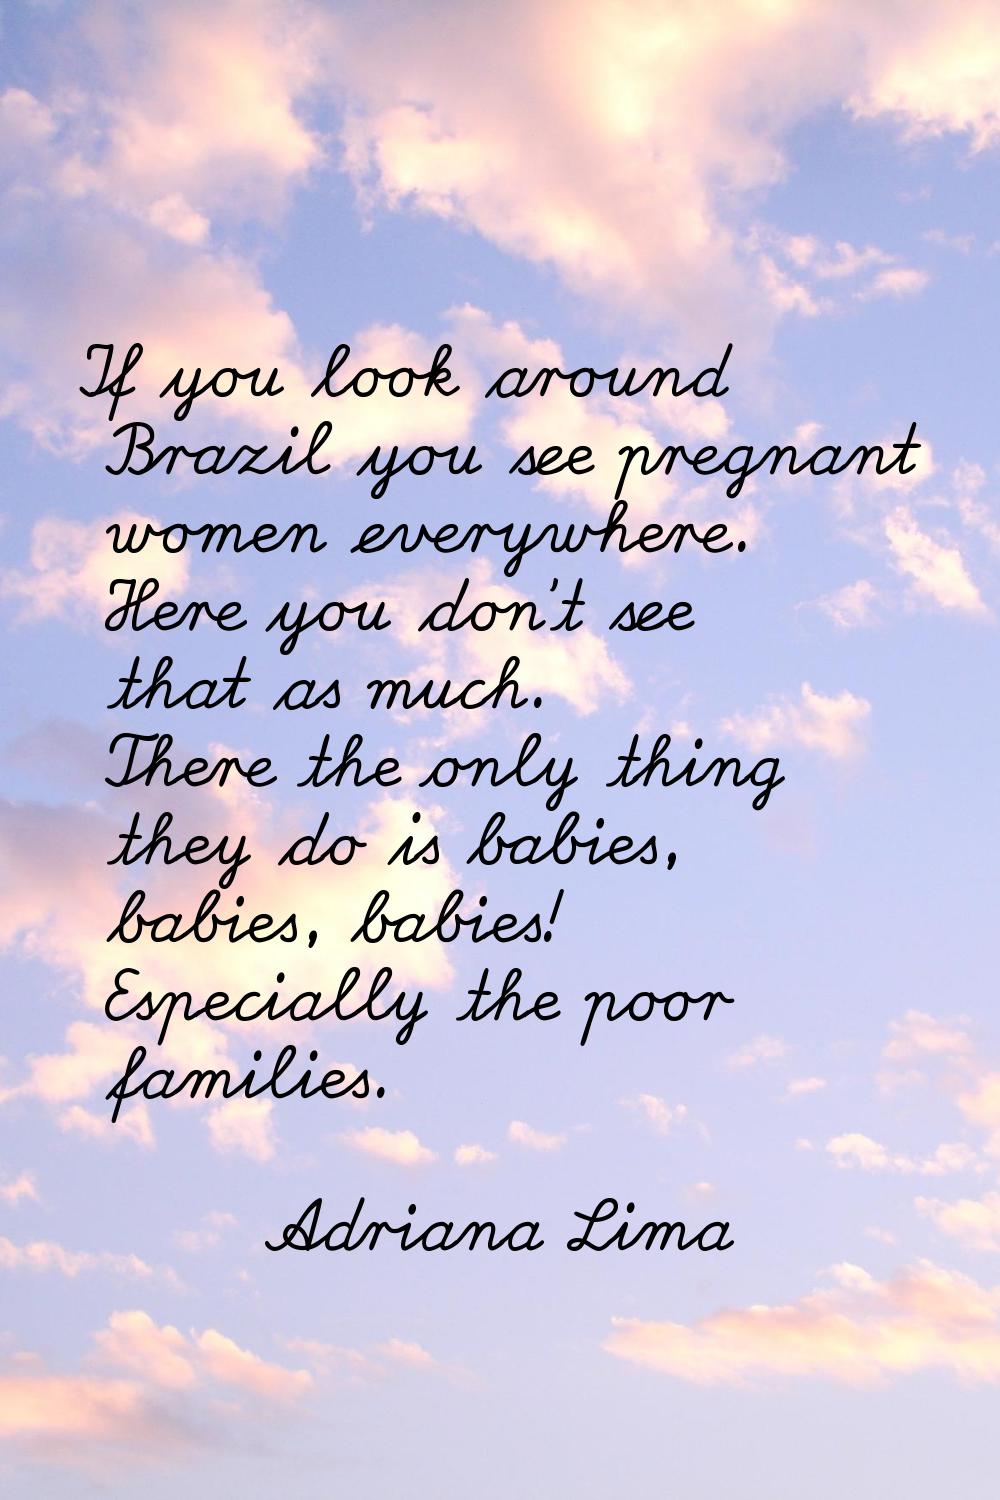 If you look around Brazil you see pregnant women everywhere. Here you don't see that as much. There